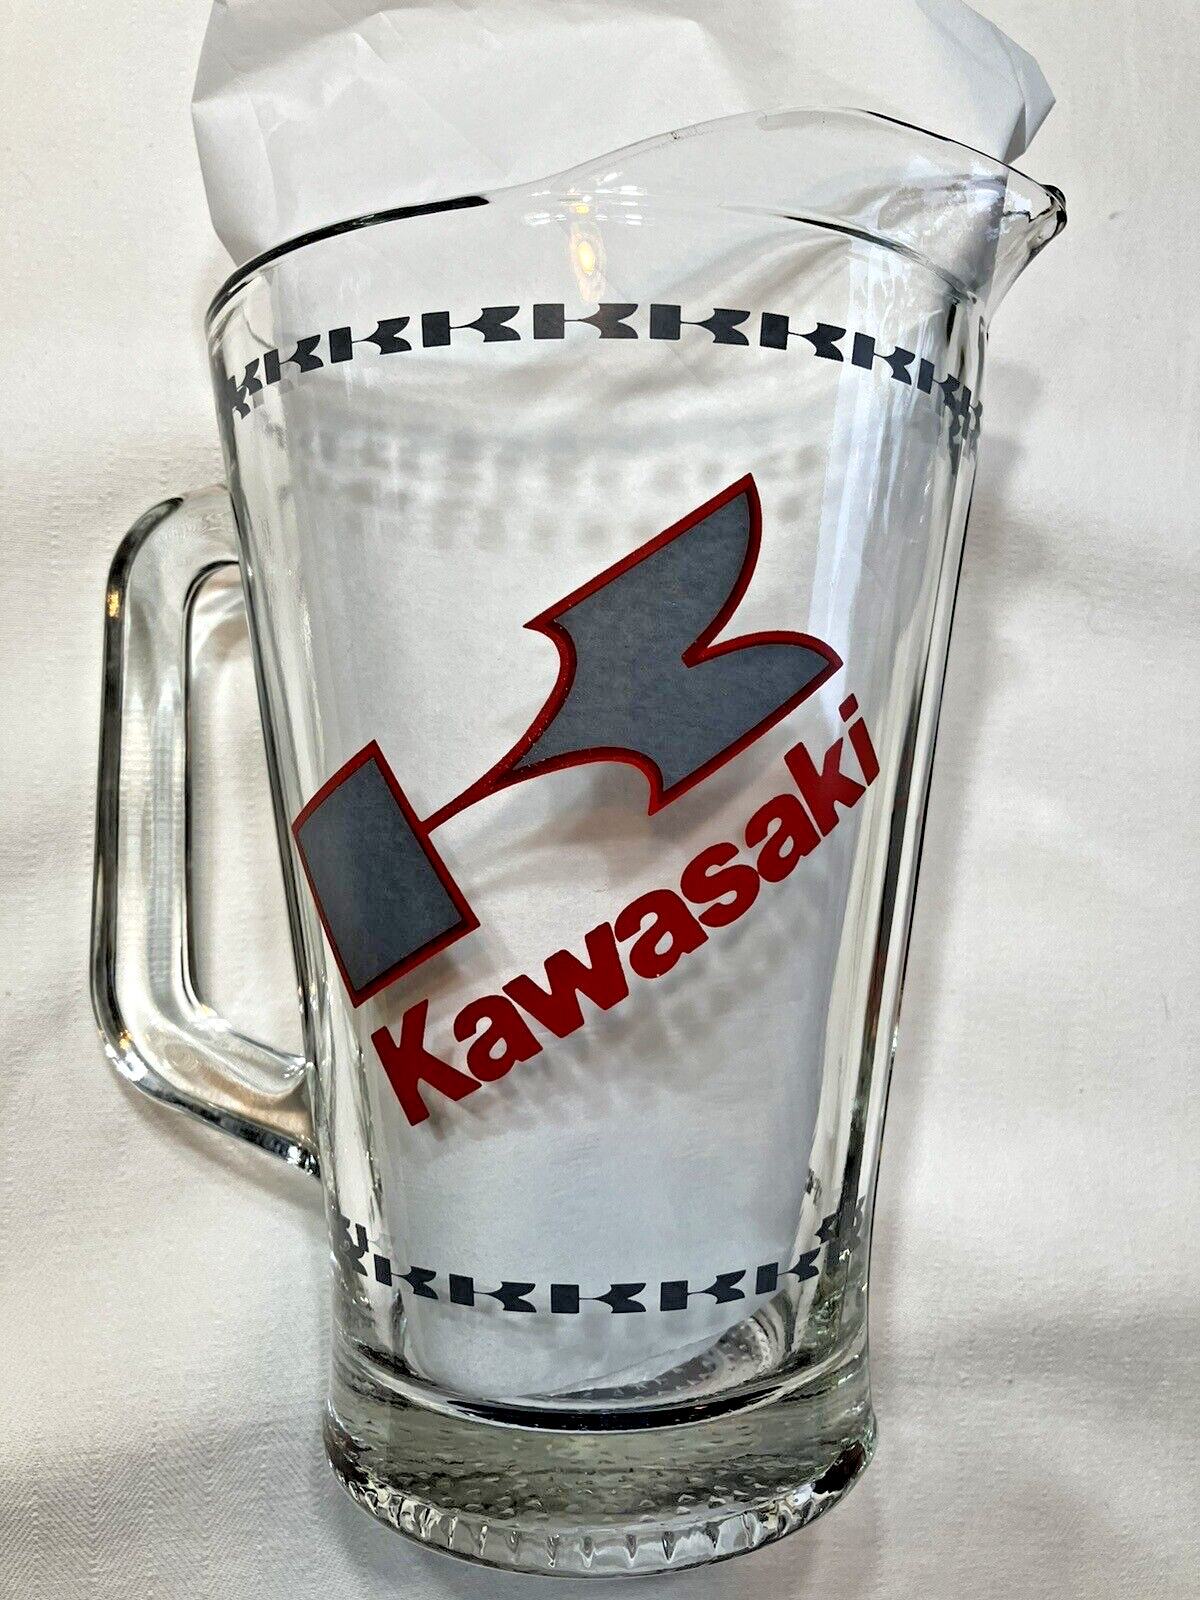 Rare Kawasaki motorcycle advertising glass beer pitcher Approx. 1.5 liters